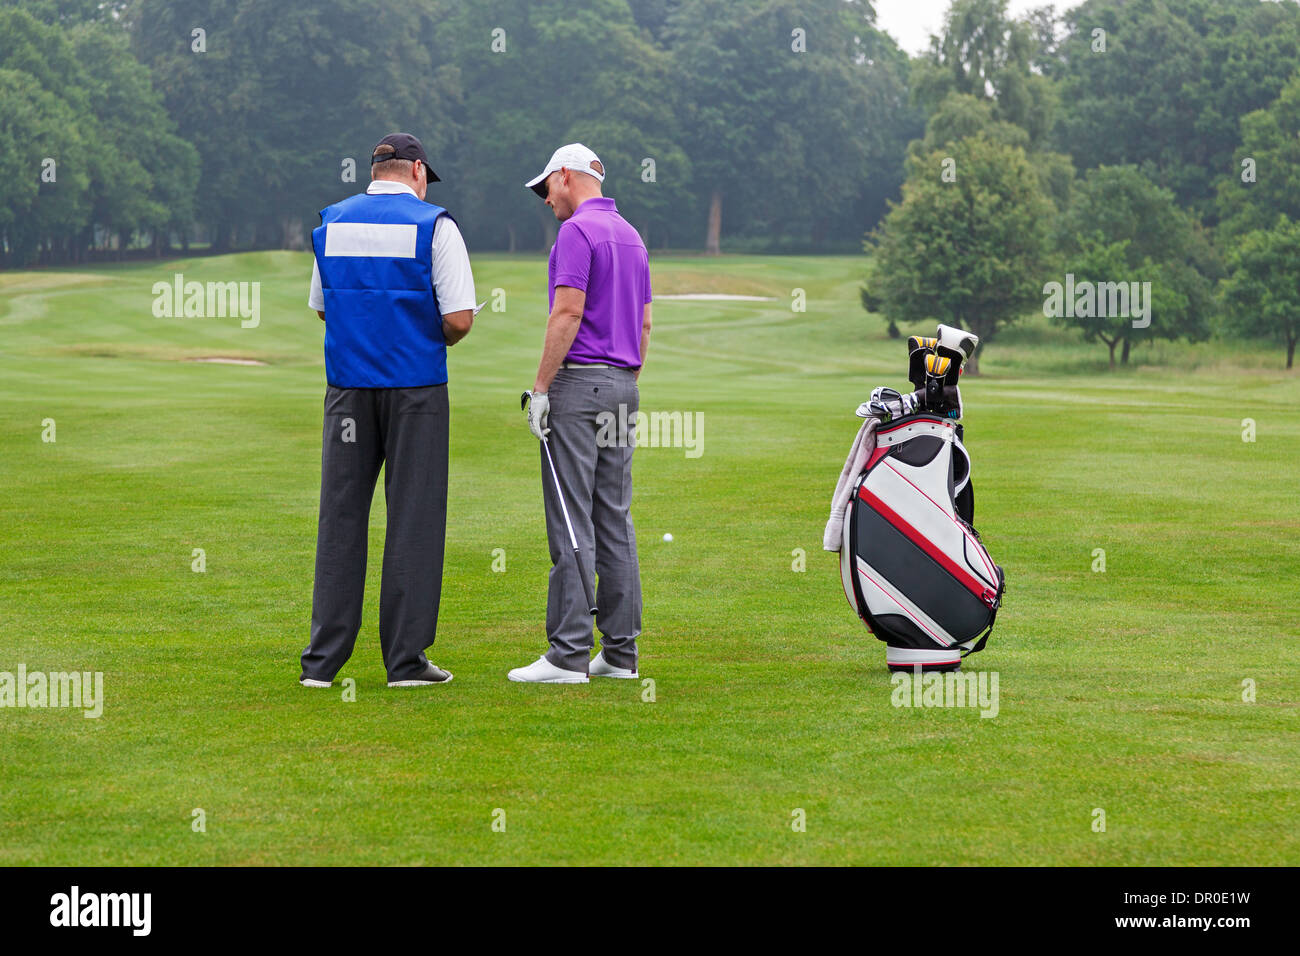 Golfer and caddy on the fairway of a par 4 reading the course guide for club selection. Stock Photo